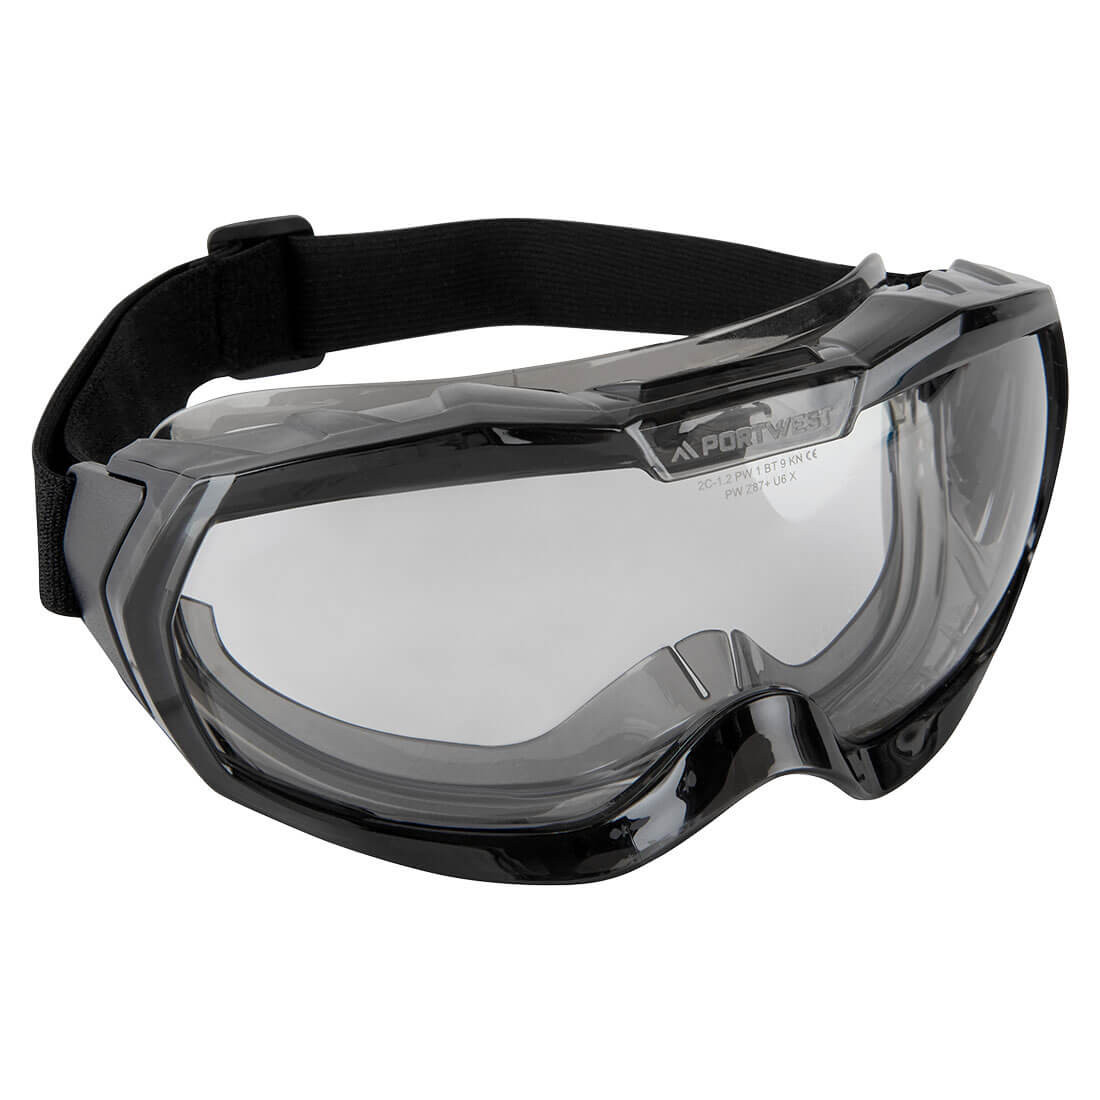 Ultra Safe Light Unvented Goggles - Personal protection